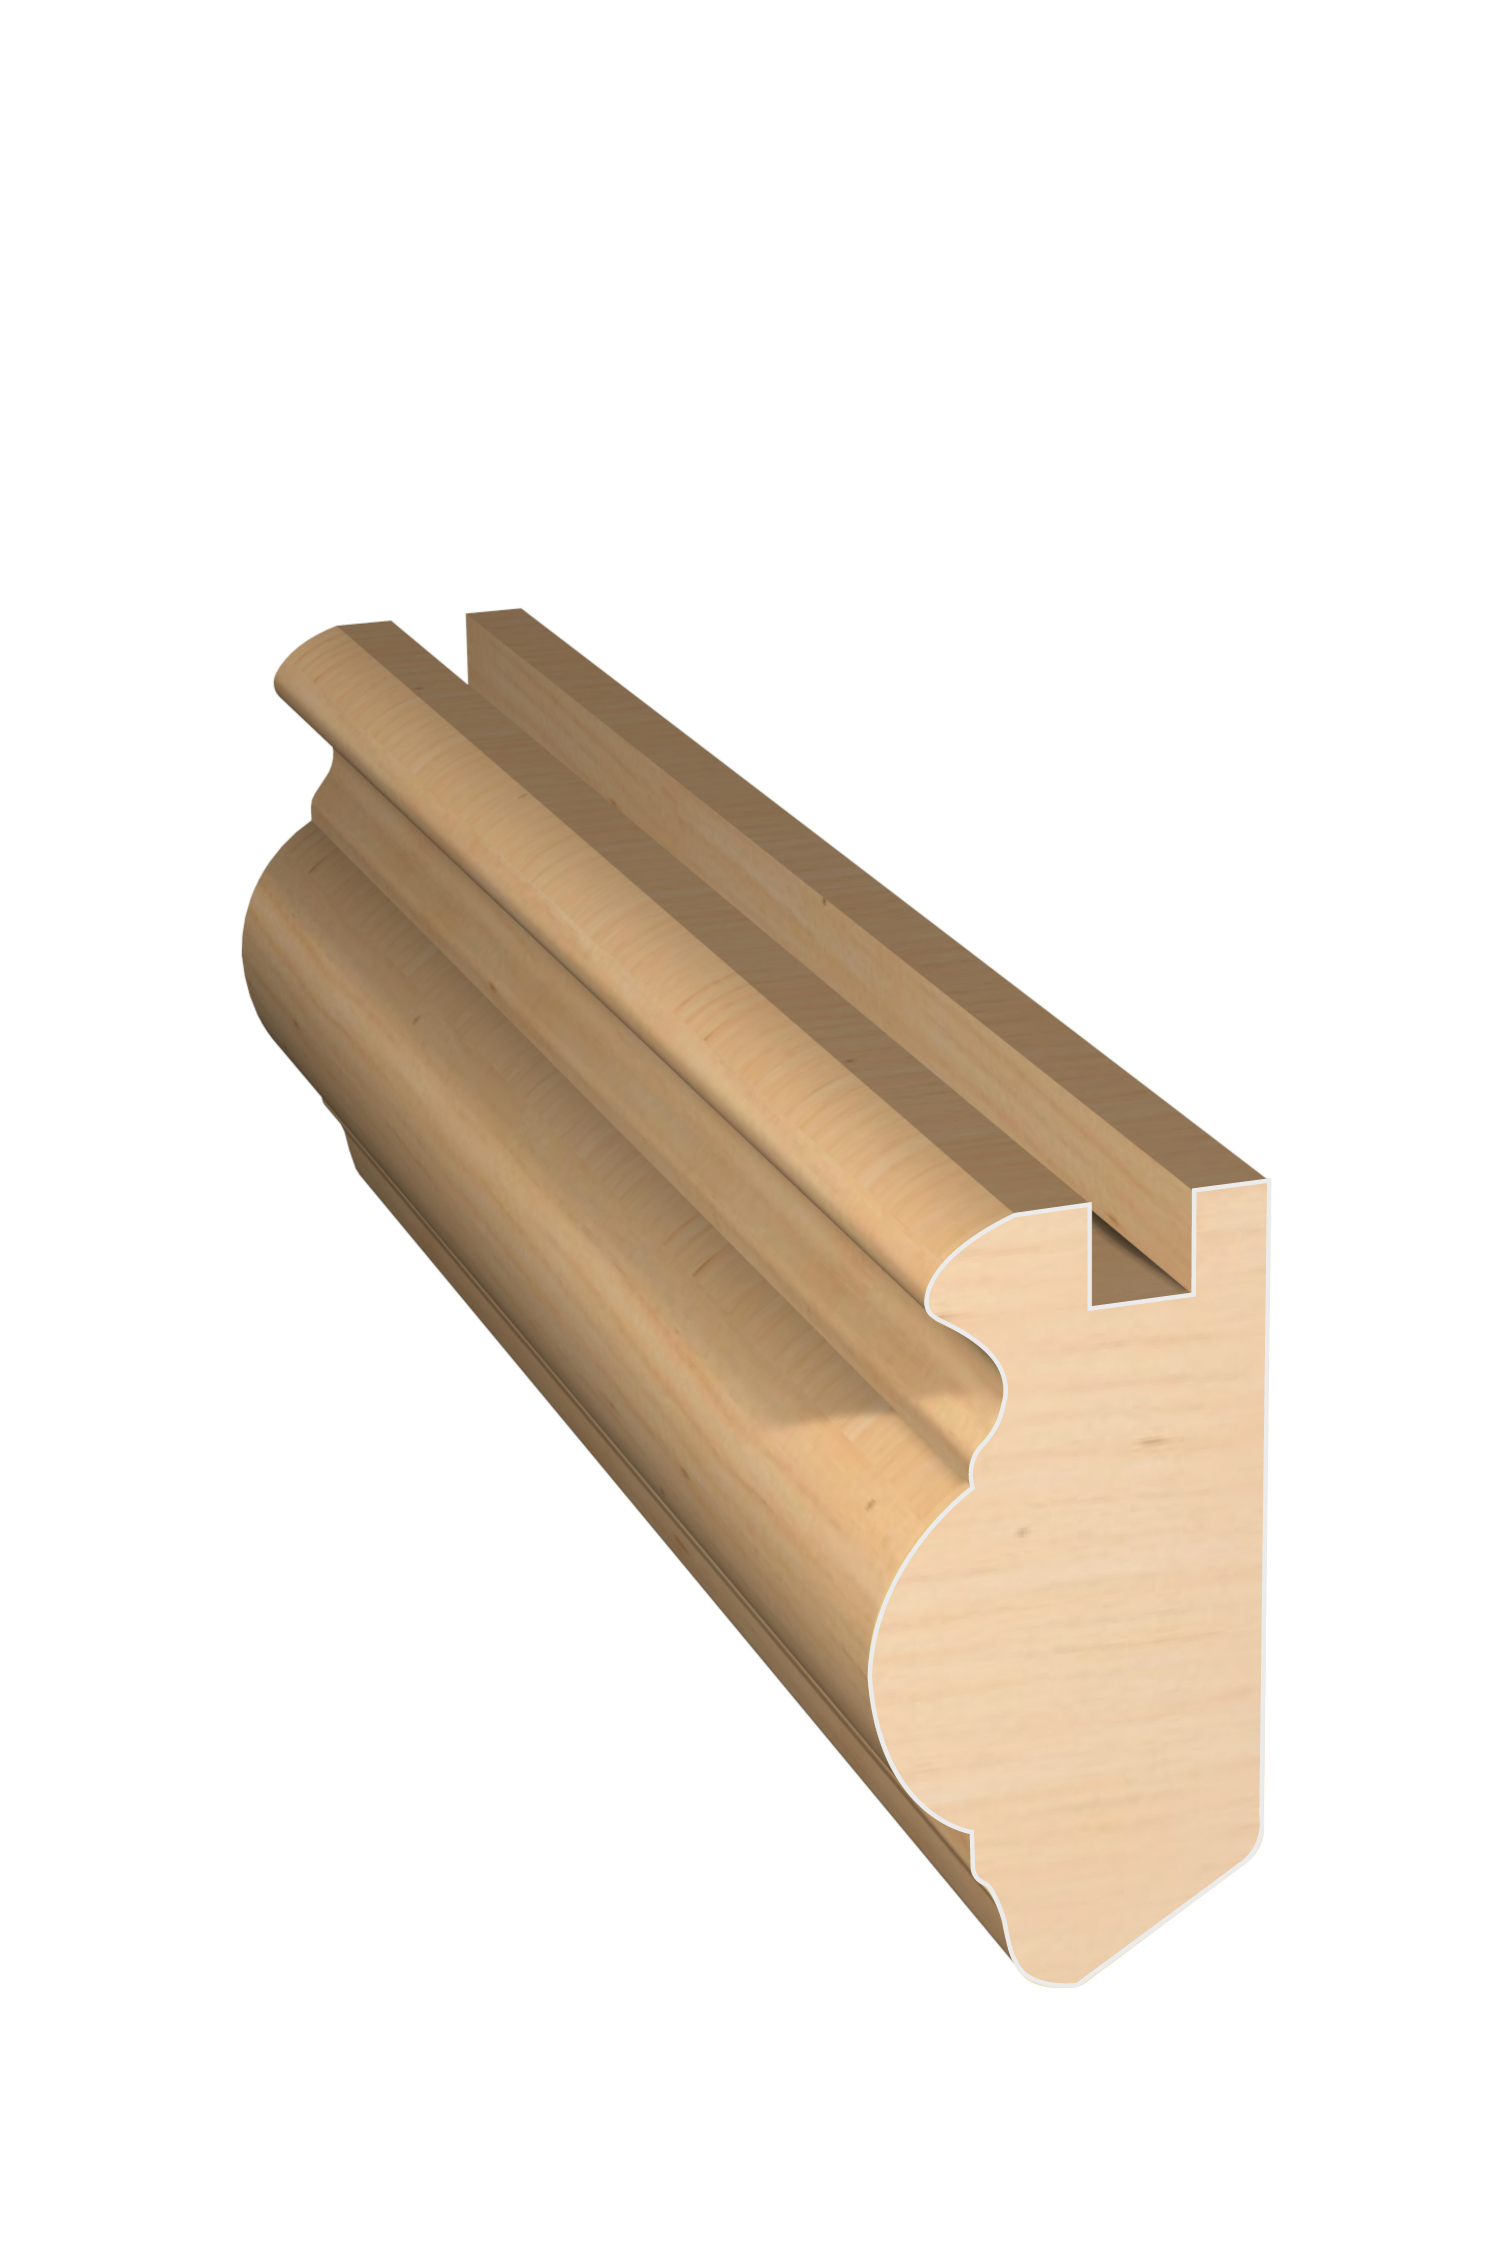 Three dimensional rendering of custom cabinet rail wood molding CABPL23 made by Public Lumber Company in Detroit.